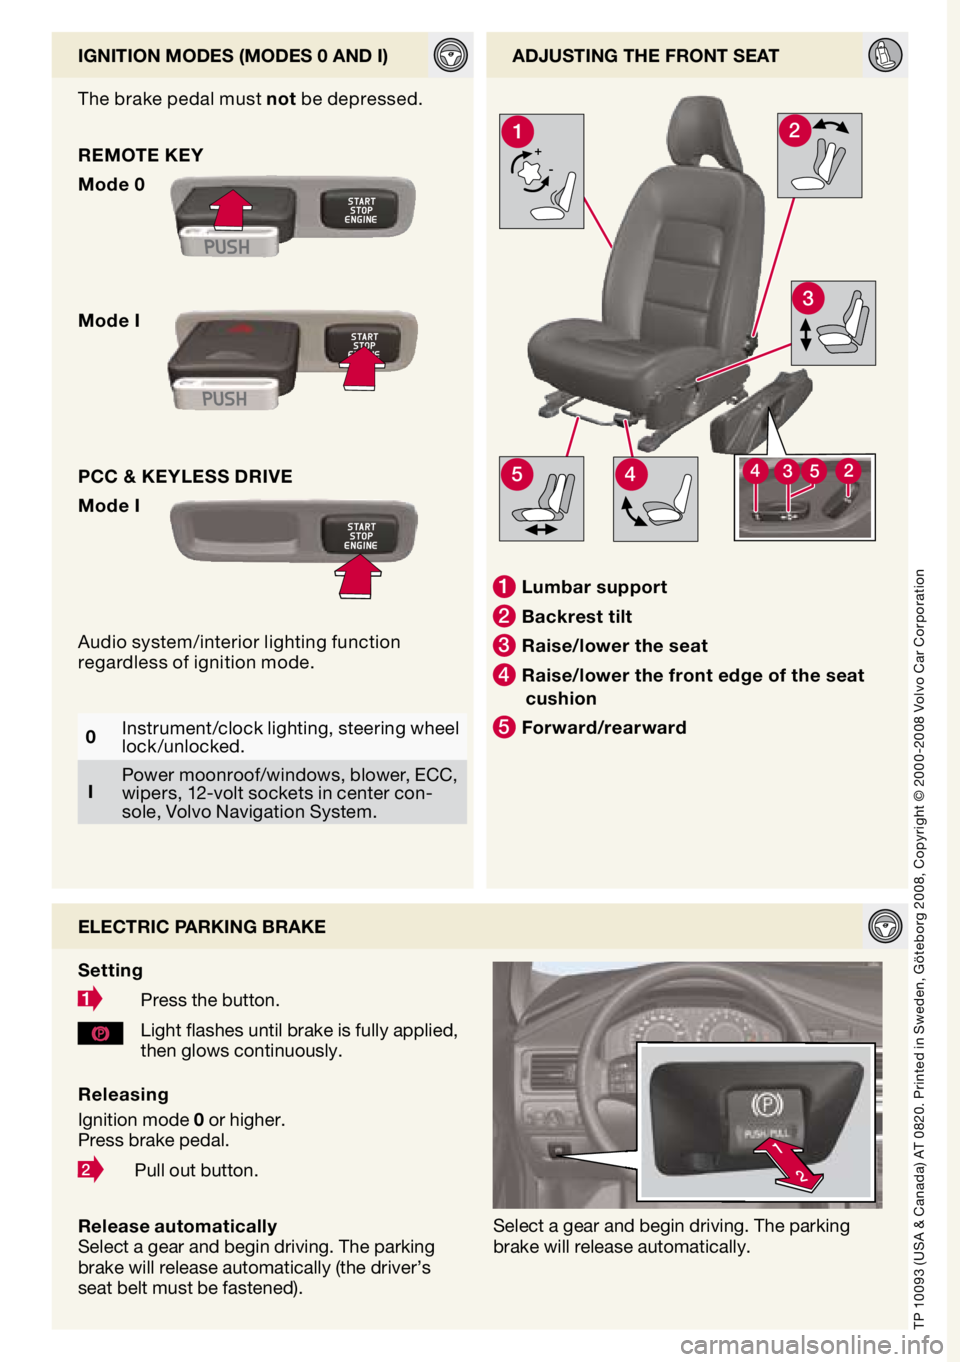 VOLVO XC70 2009  Quick Guide 
2
1

+-
3
21
544352

ignition modes (modes 0 And i)AdjUsting the front seAt
electric PArking BrAke
s etting
 
Press the button.
Light flashes until brake is fully applied, then glows continuously.
Se